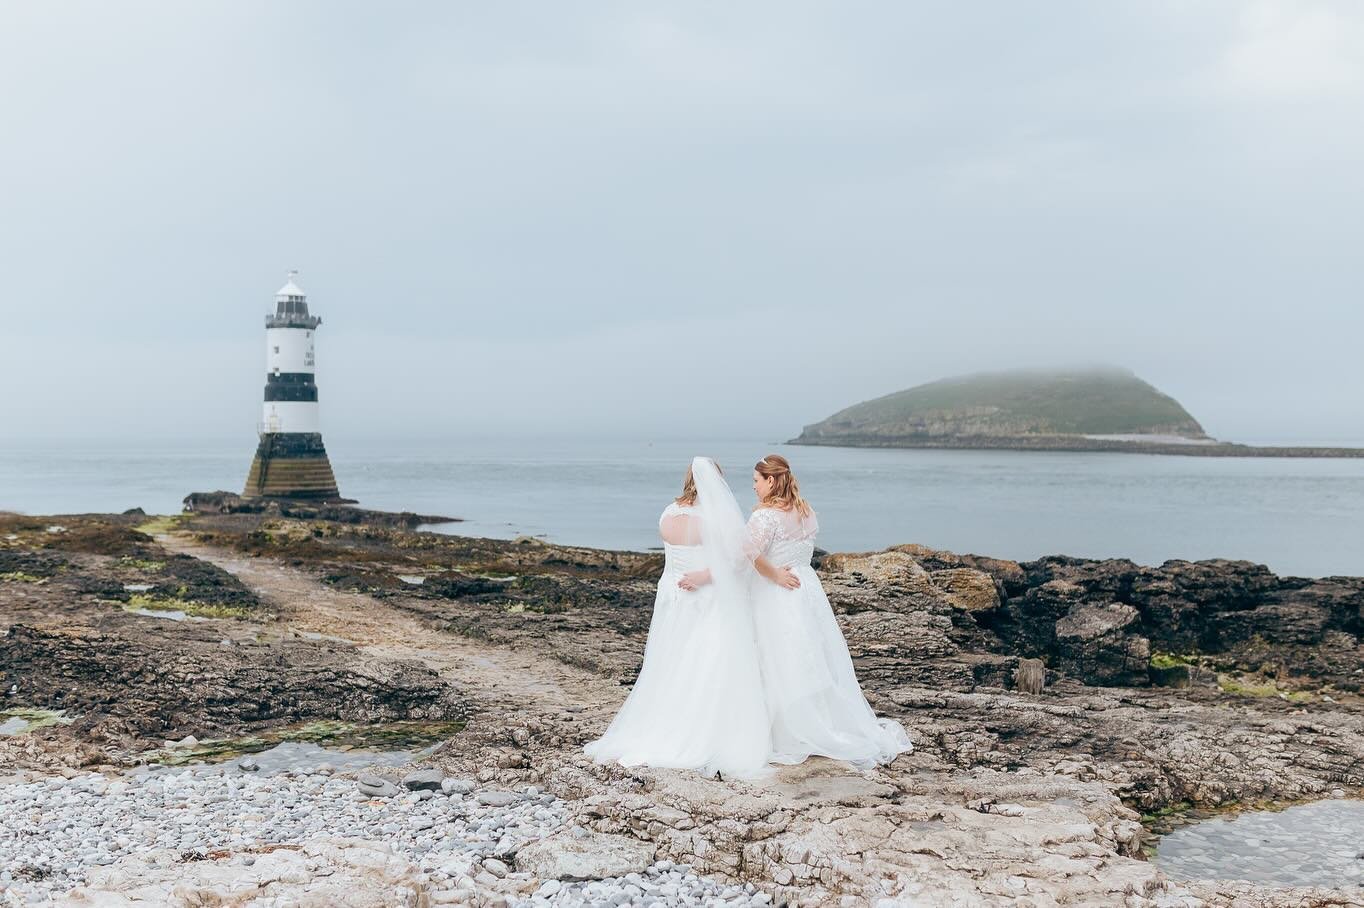 🐚 Yvonne and Natalia 🐚

Yesterday&rsquo;s elopement was beautiful!
And what a location! There&rsquo;s just something so special about the Welsh coast. I&rsquo;m so lucky to be an elopement photographer in North Wales and I&rsquo;m so grateful I get